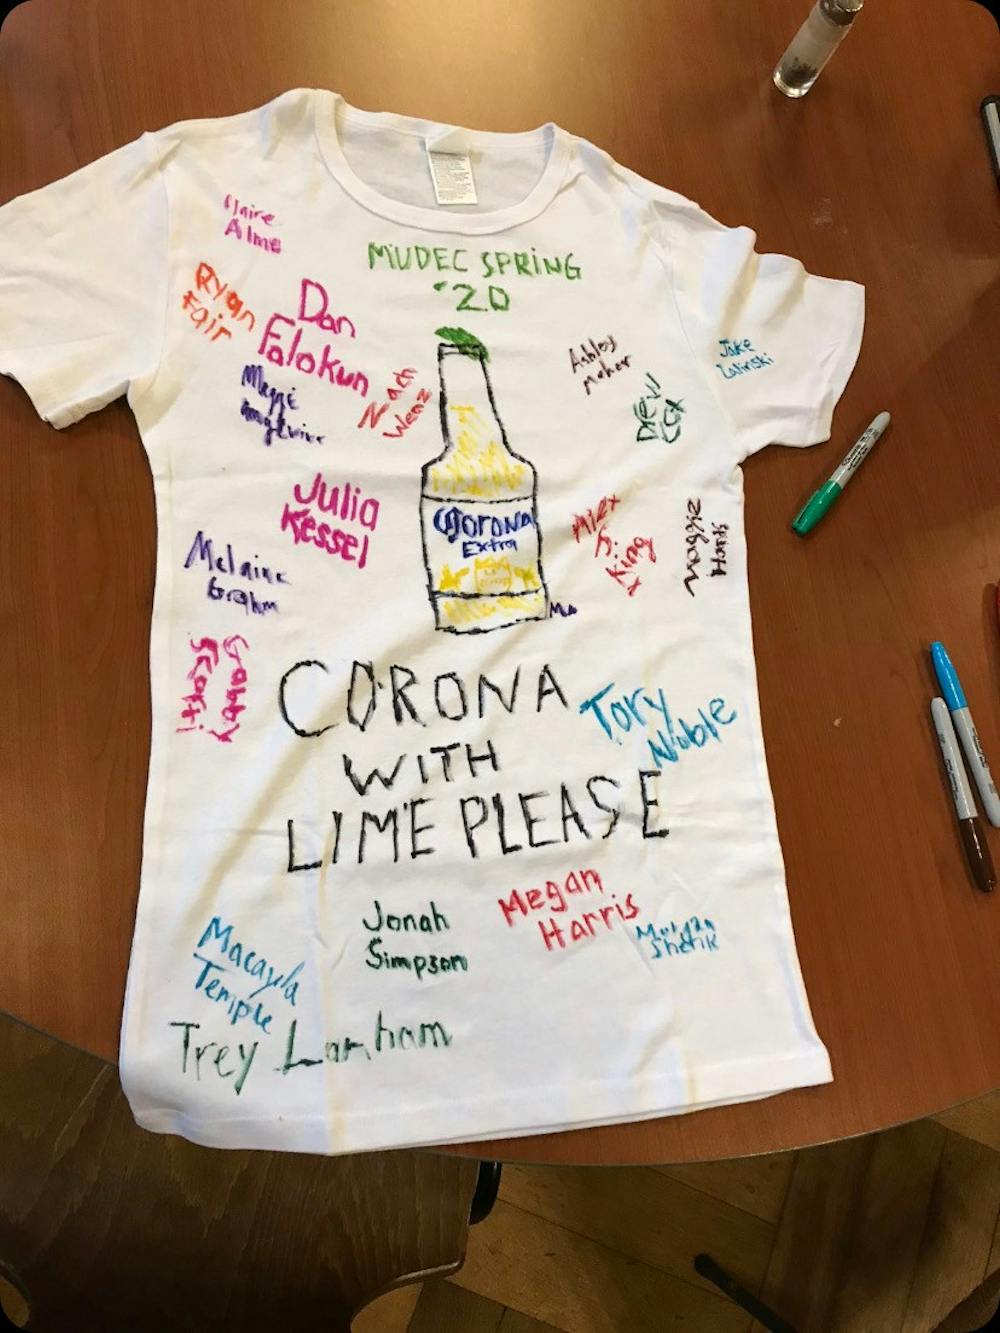 <p>Per MUDEC tradition, each visiting class designs a t-shirt to be hung in the local college bar, Boot. This year&#x27;s t-shirt design reflected the students&#x27; reaction to leaving Luxembourg early due to the international novel coronavirus pandemic.</p>